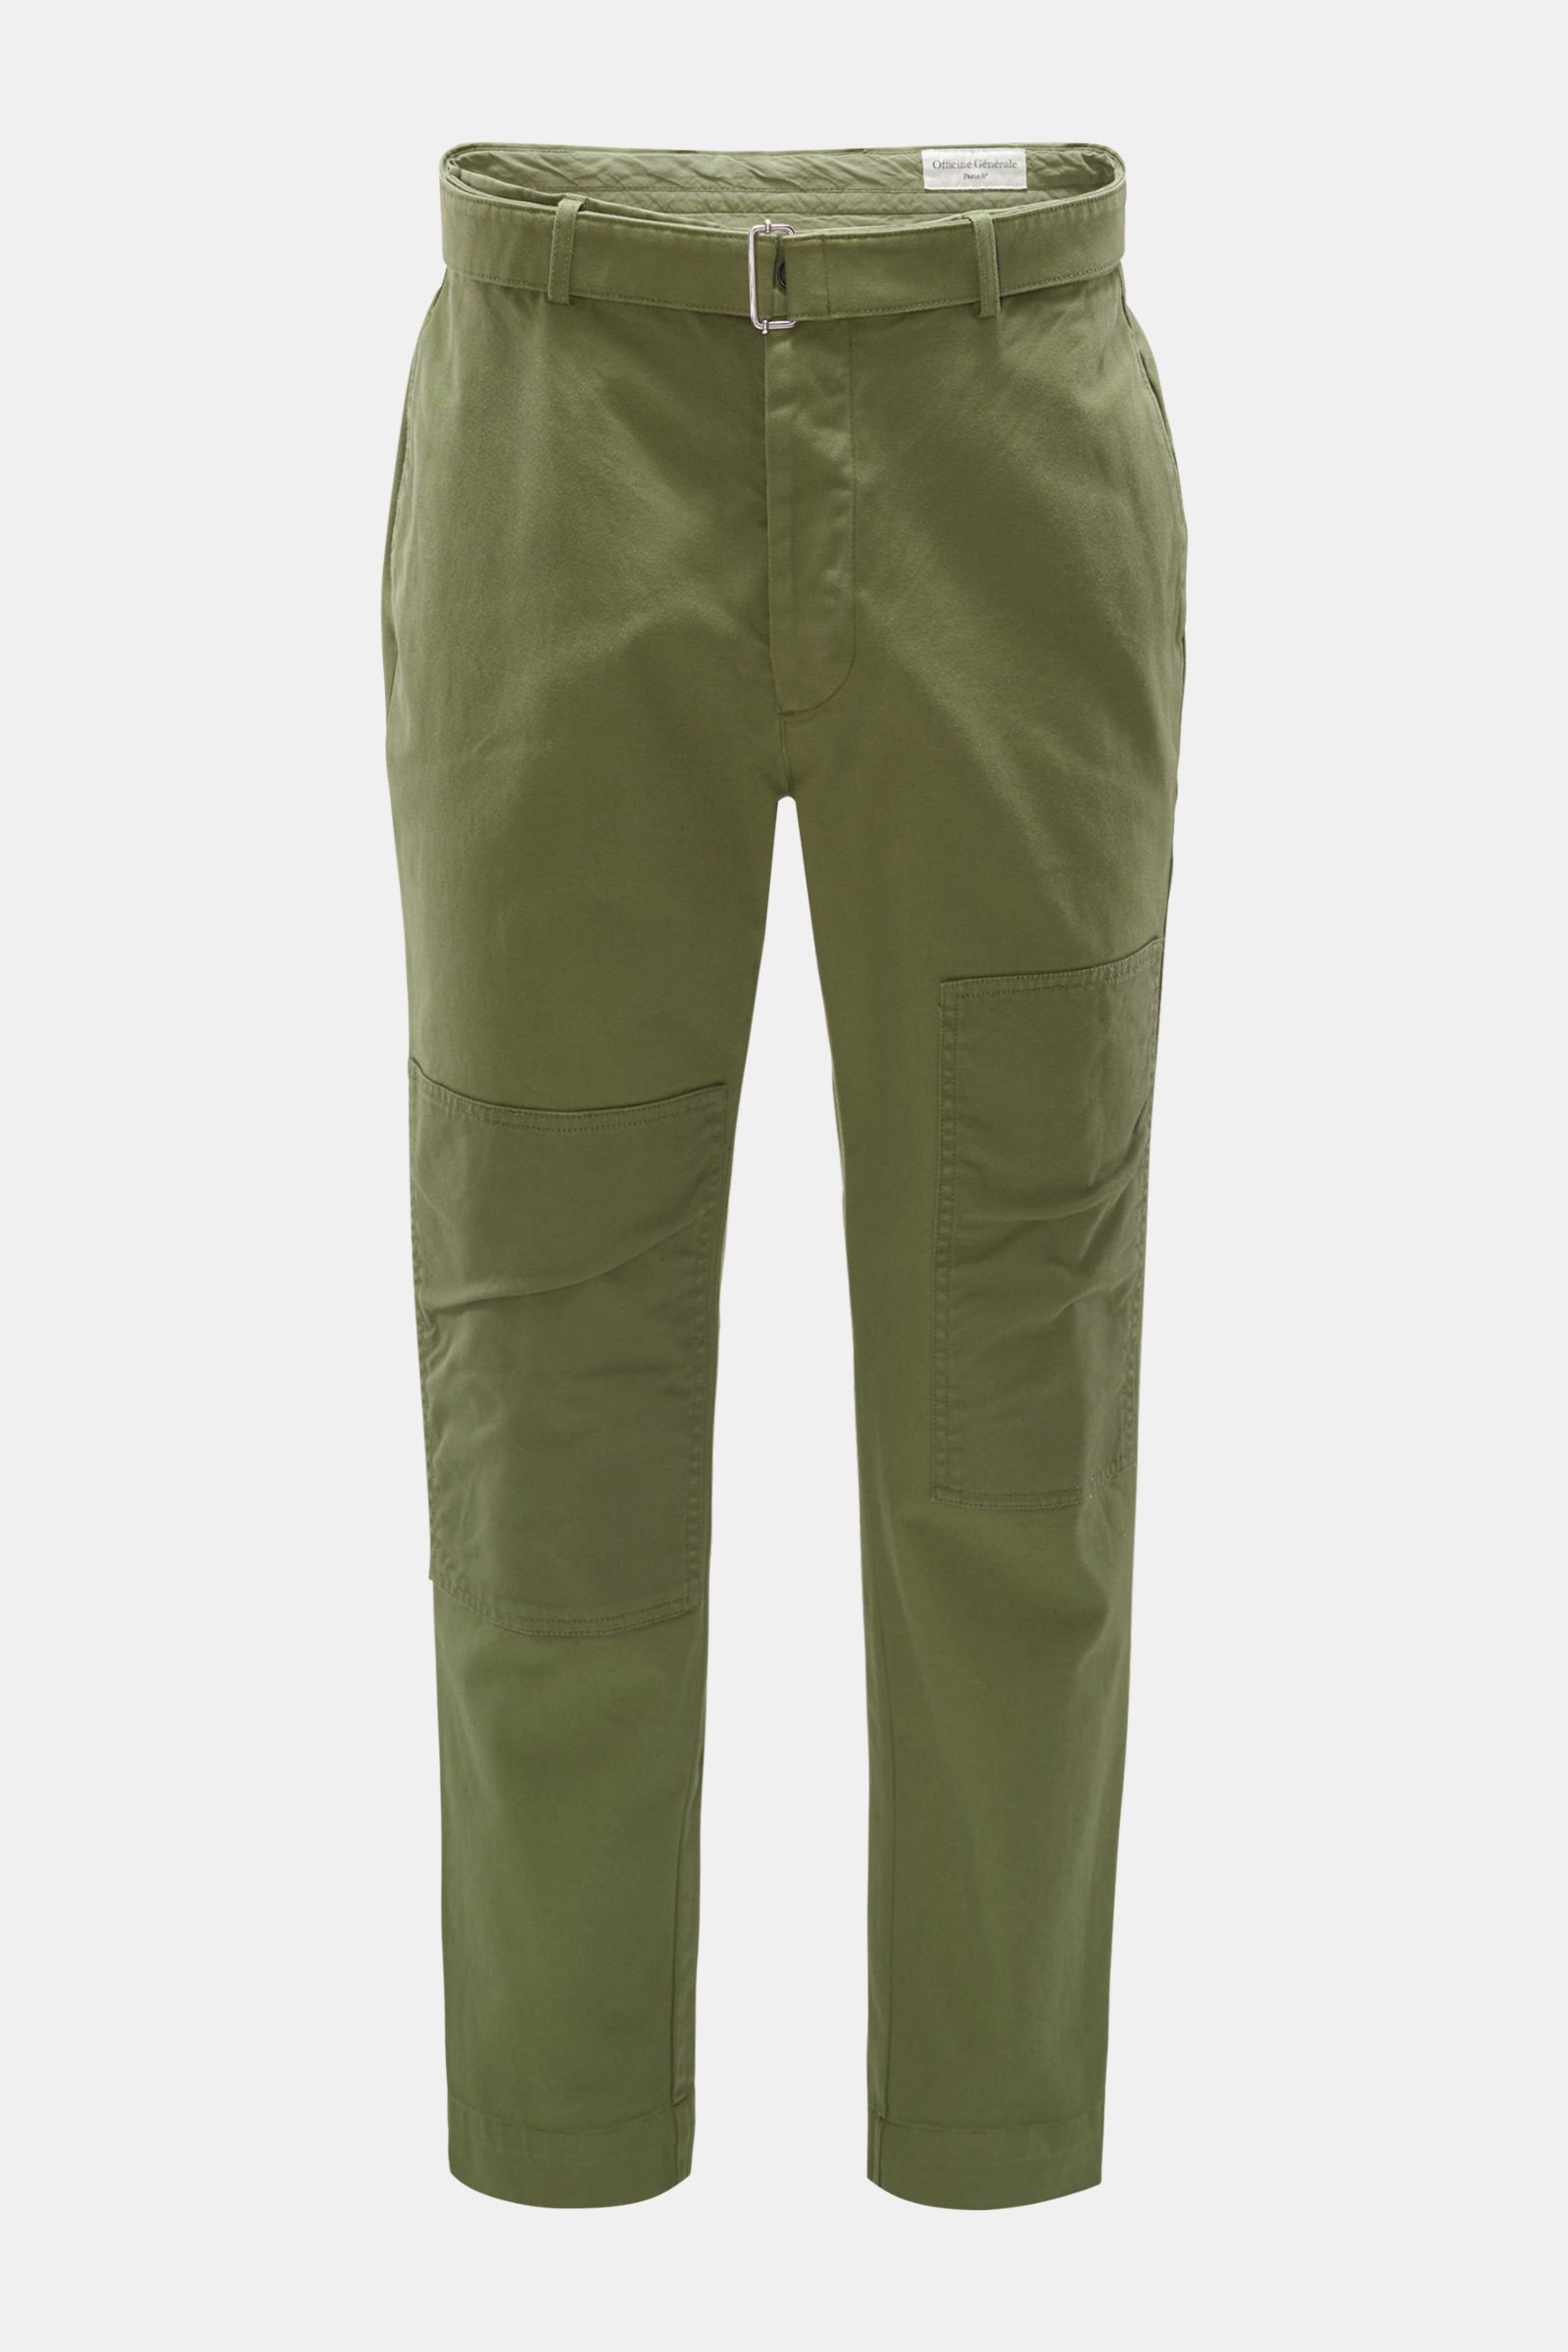 Cotton trousers 'Edouard' olive